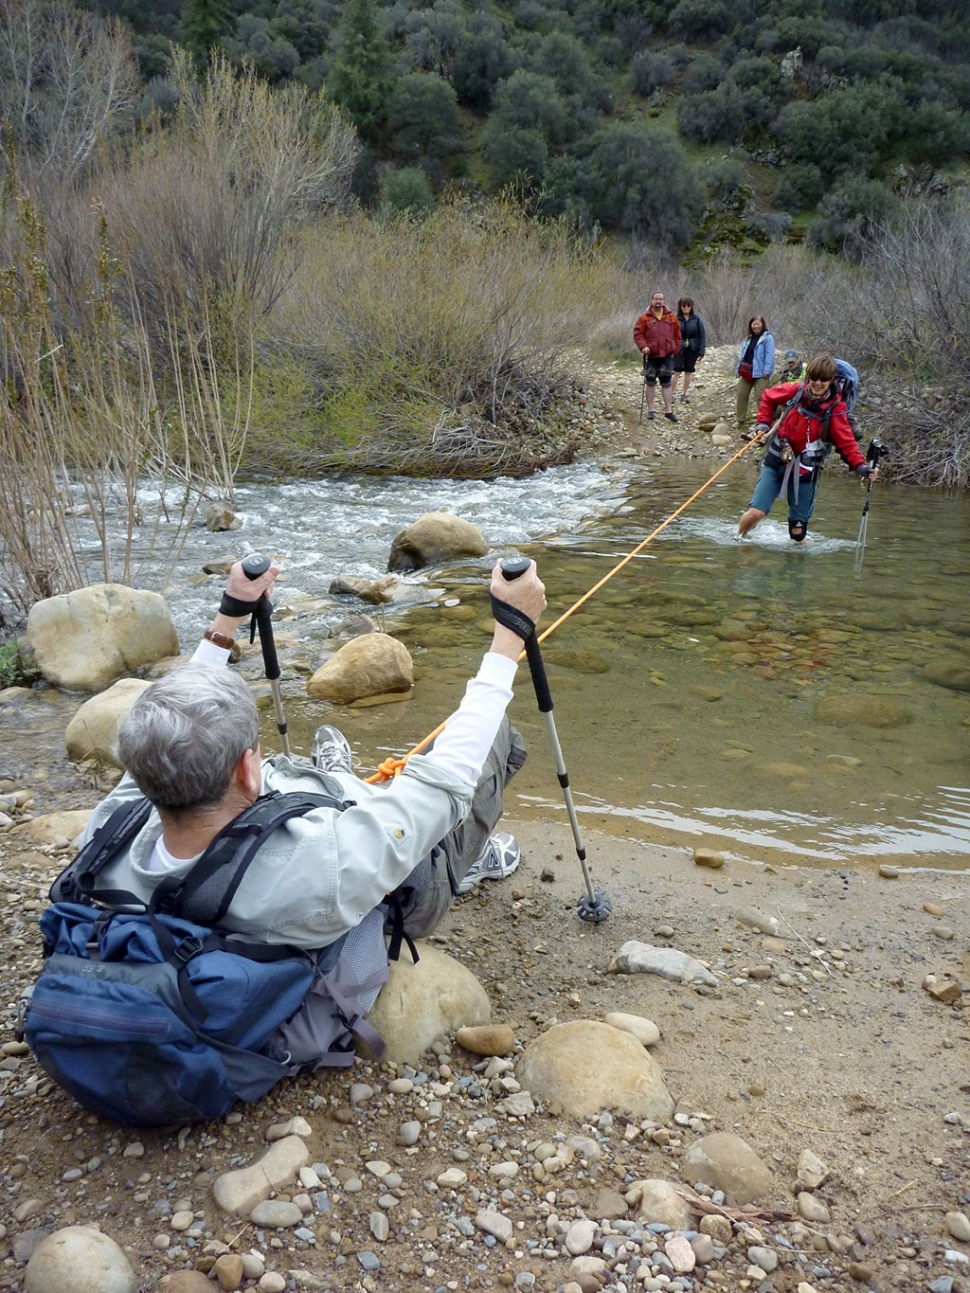 Learning how to get safely across a fast moving creek is practiced by WBC students. Photo by Cara Peden.